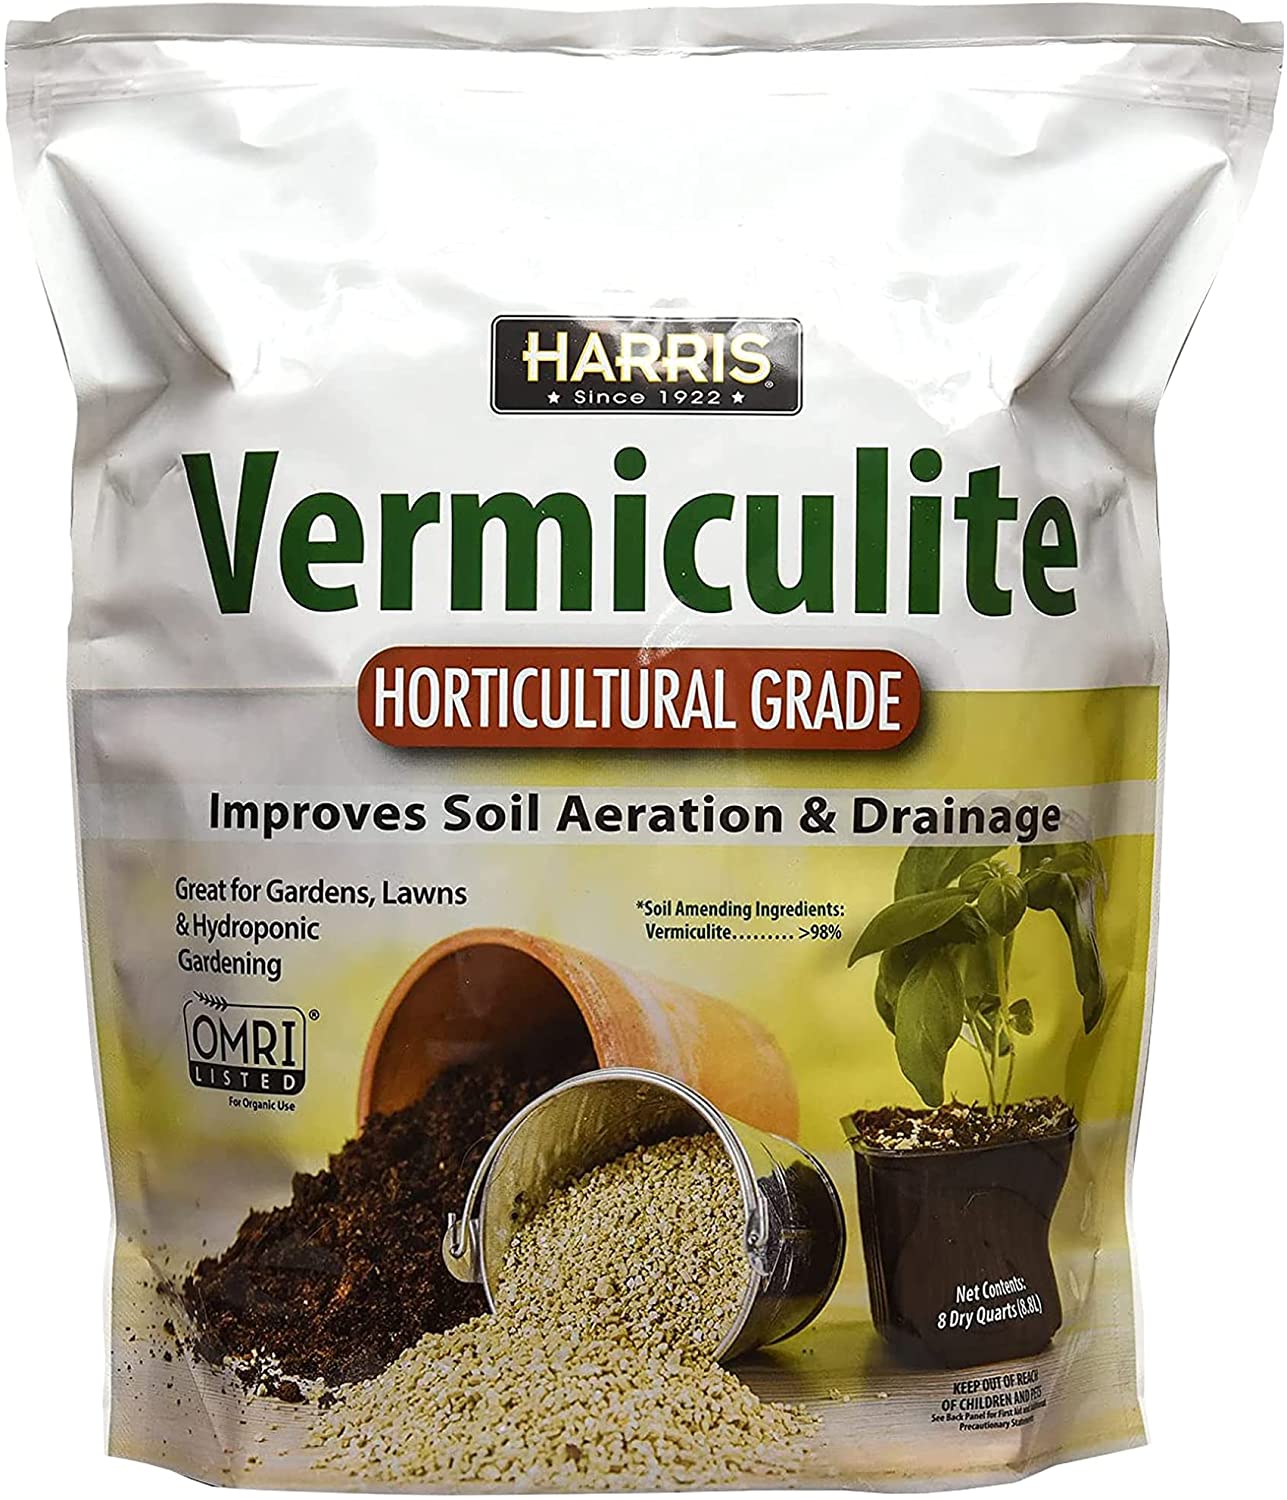 Premium Horticultural Vermiculite for Indoor Plants and Gardening